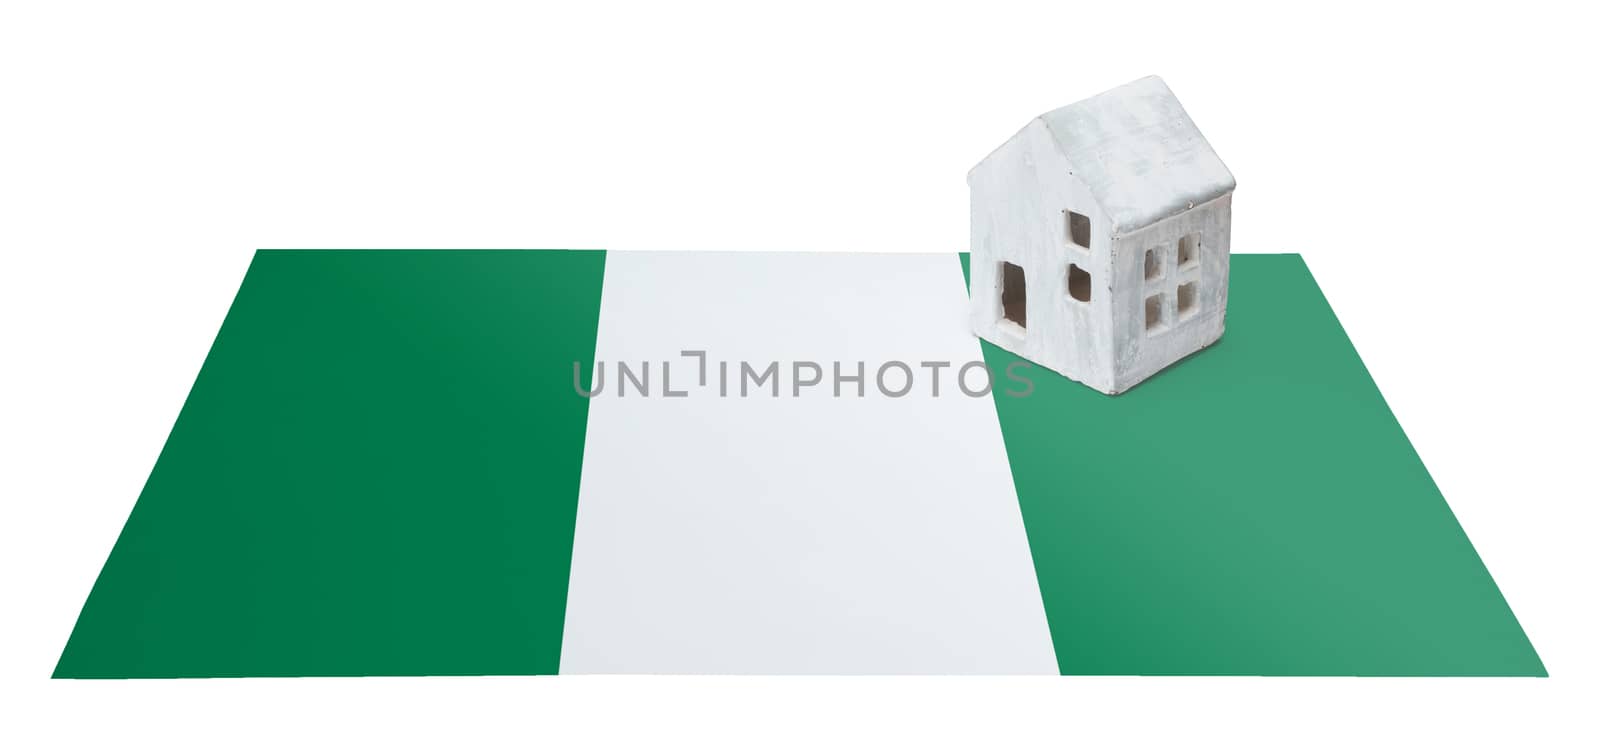 Small house on a flag - Living or migrating to Nigeria